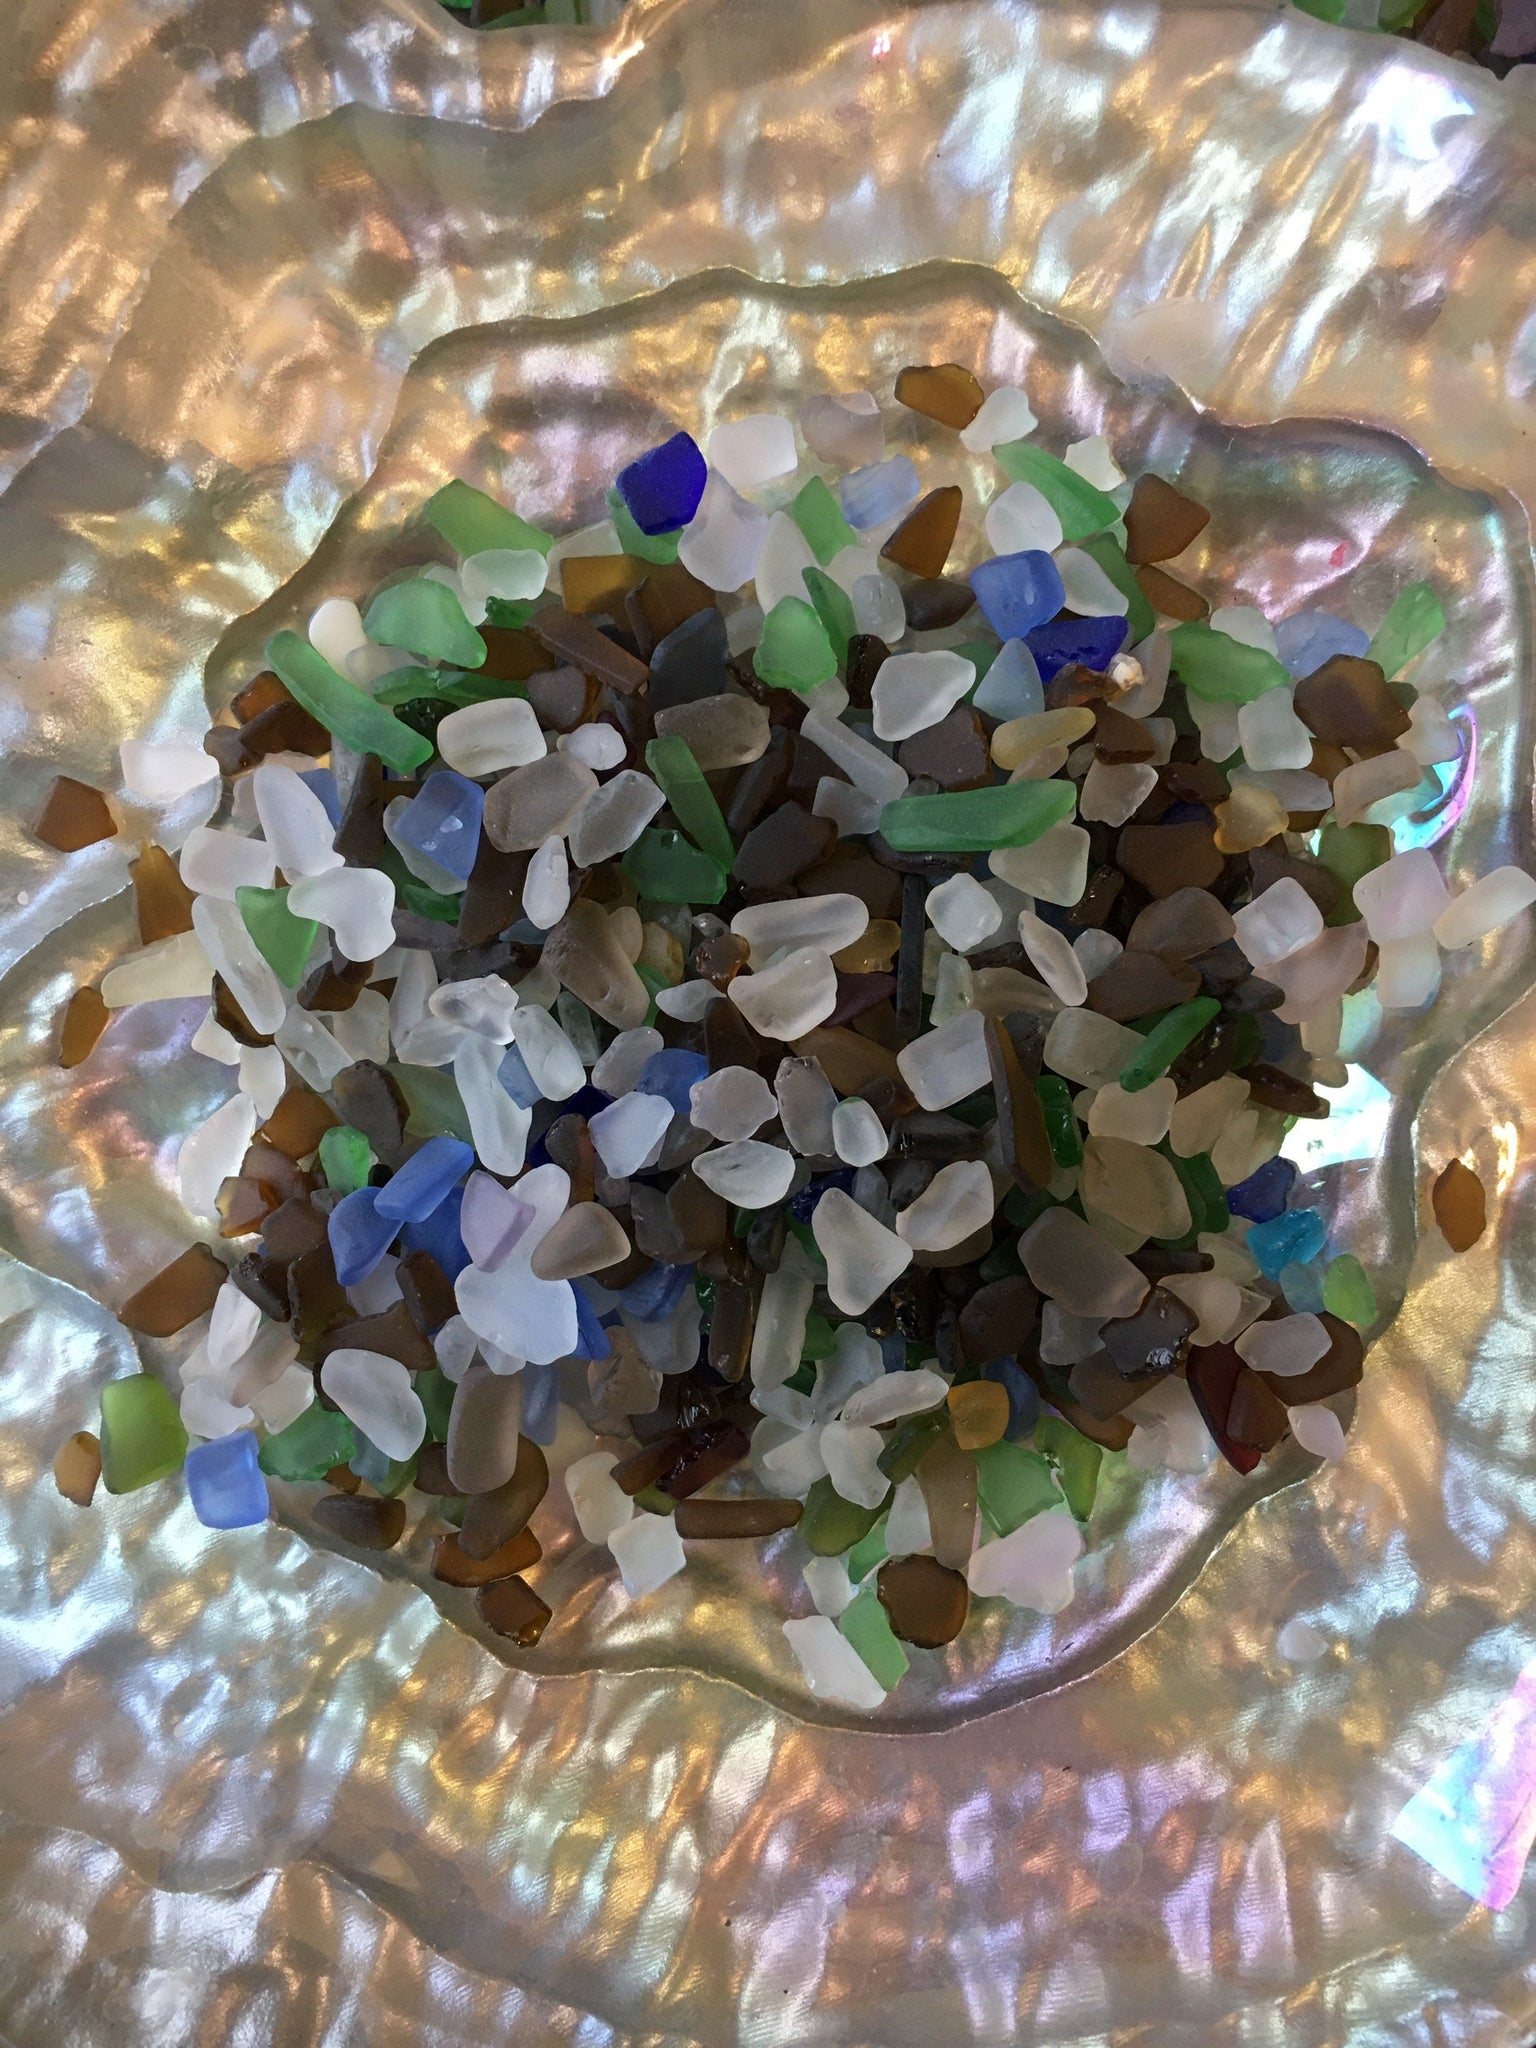 Quality Natural Sea Glass Bulk. Tiny & Extra Small Frosted Genuine Surf  Tumbled Spanish Sea Glass for Jewelry Art Crafts 0,5-1,5cm 0,20,6 